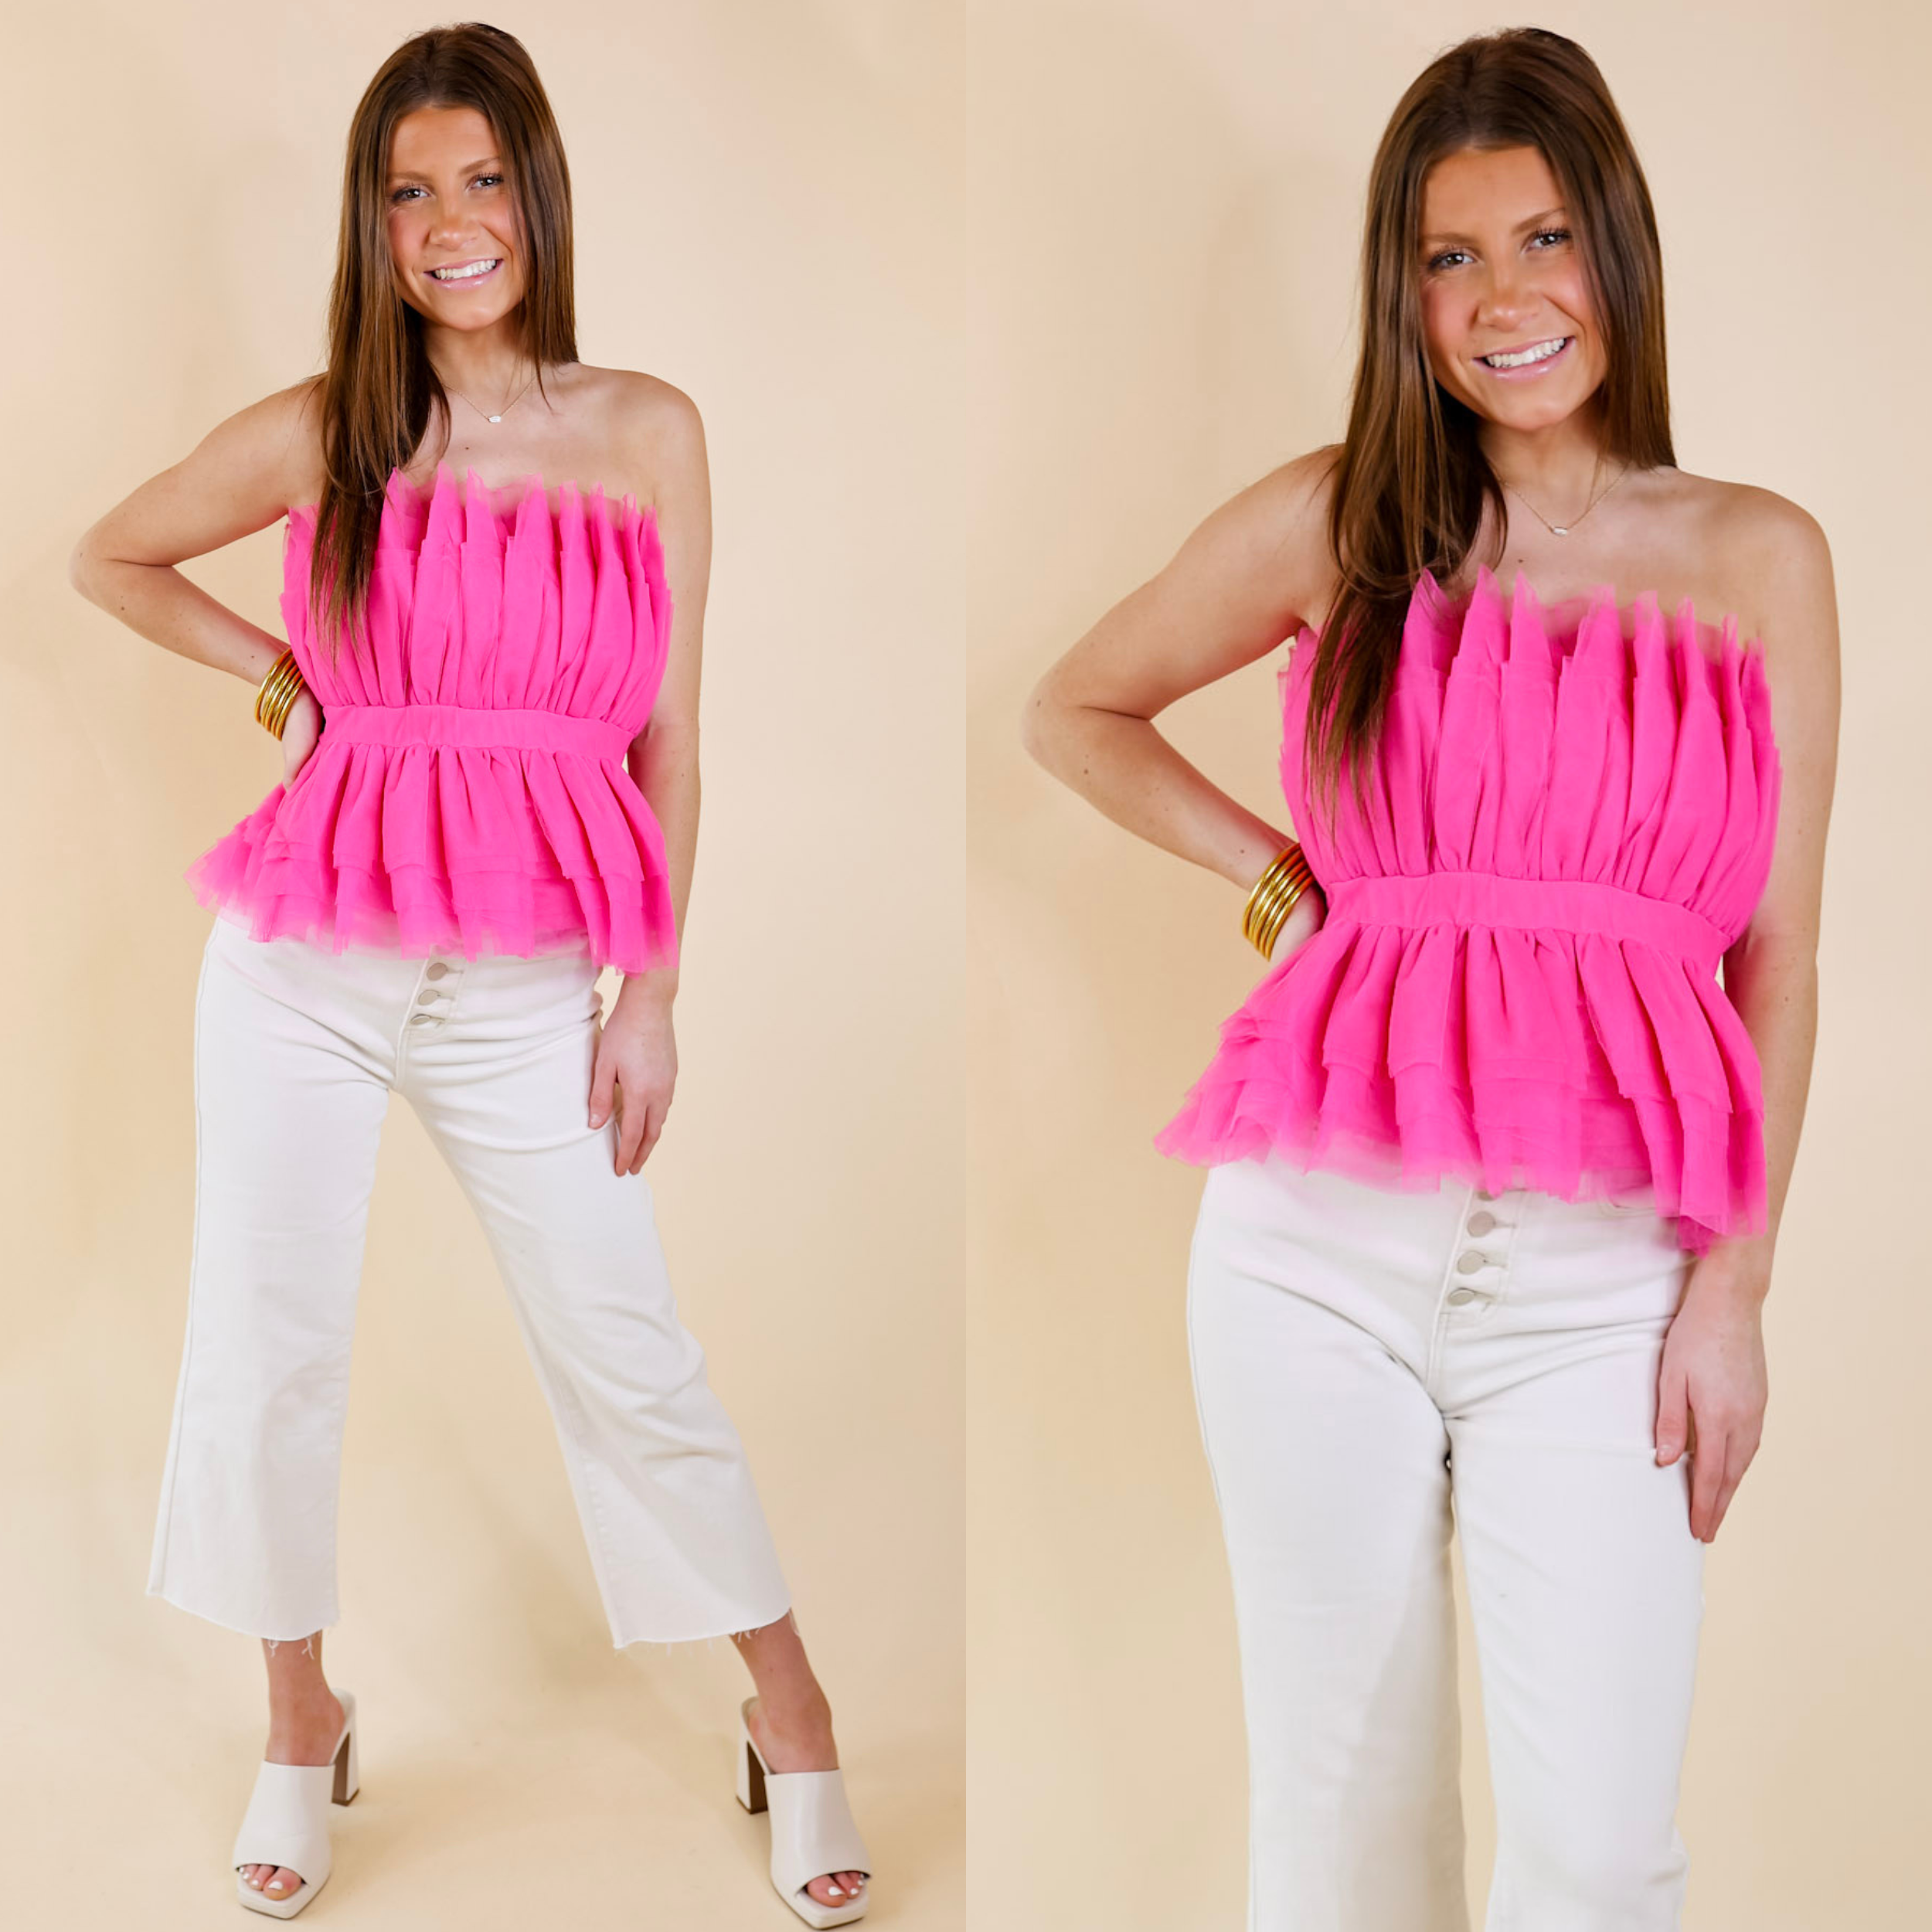 Model is wearing a strapless top made of tulle ruffles that is hot pink. Model has this top paired with white jeans, ivory heels, and gold jewelry.